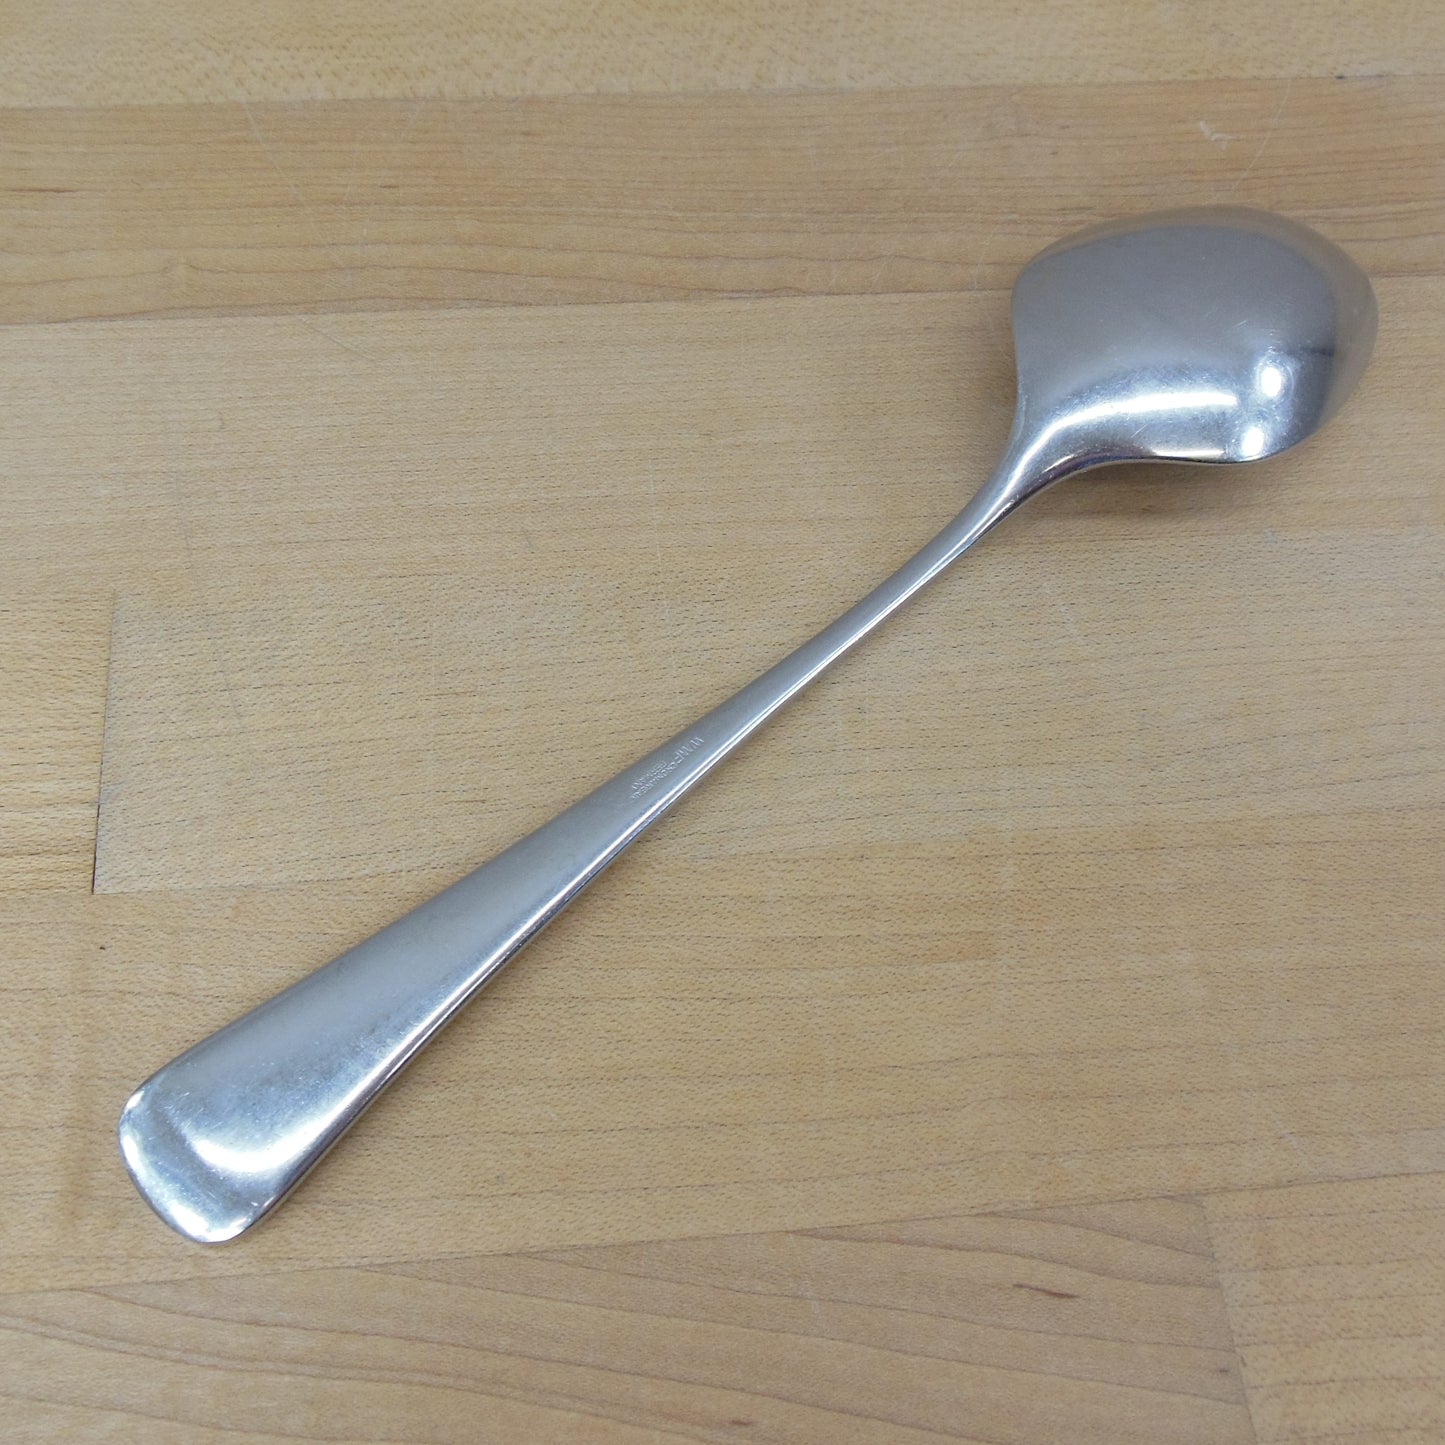 WMF Germany Cromargan Stainless Finesse Flatware - Table Serving Spoon Used